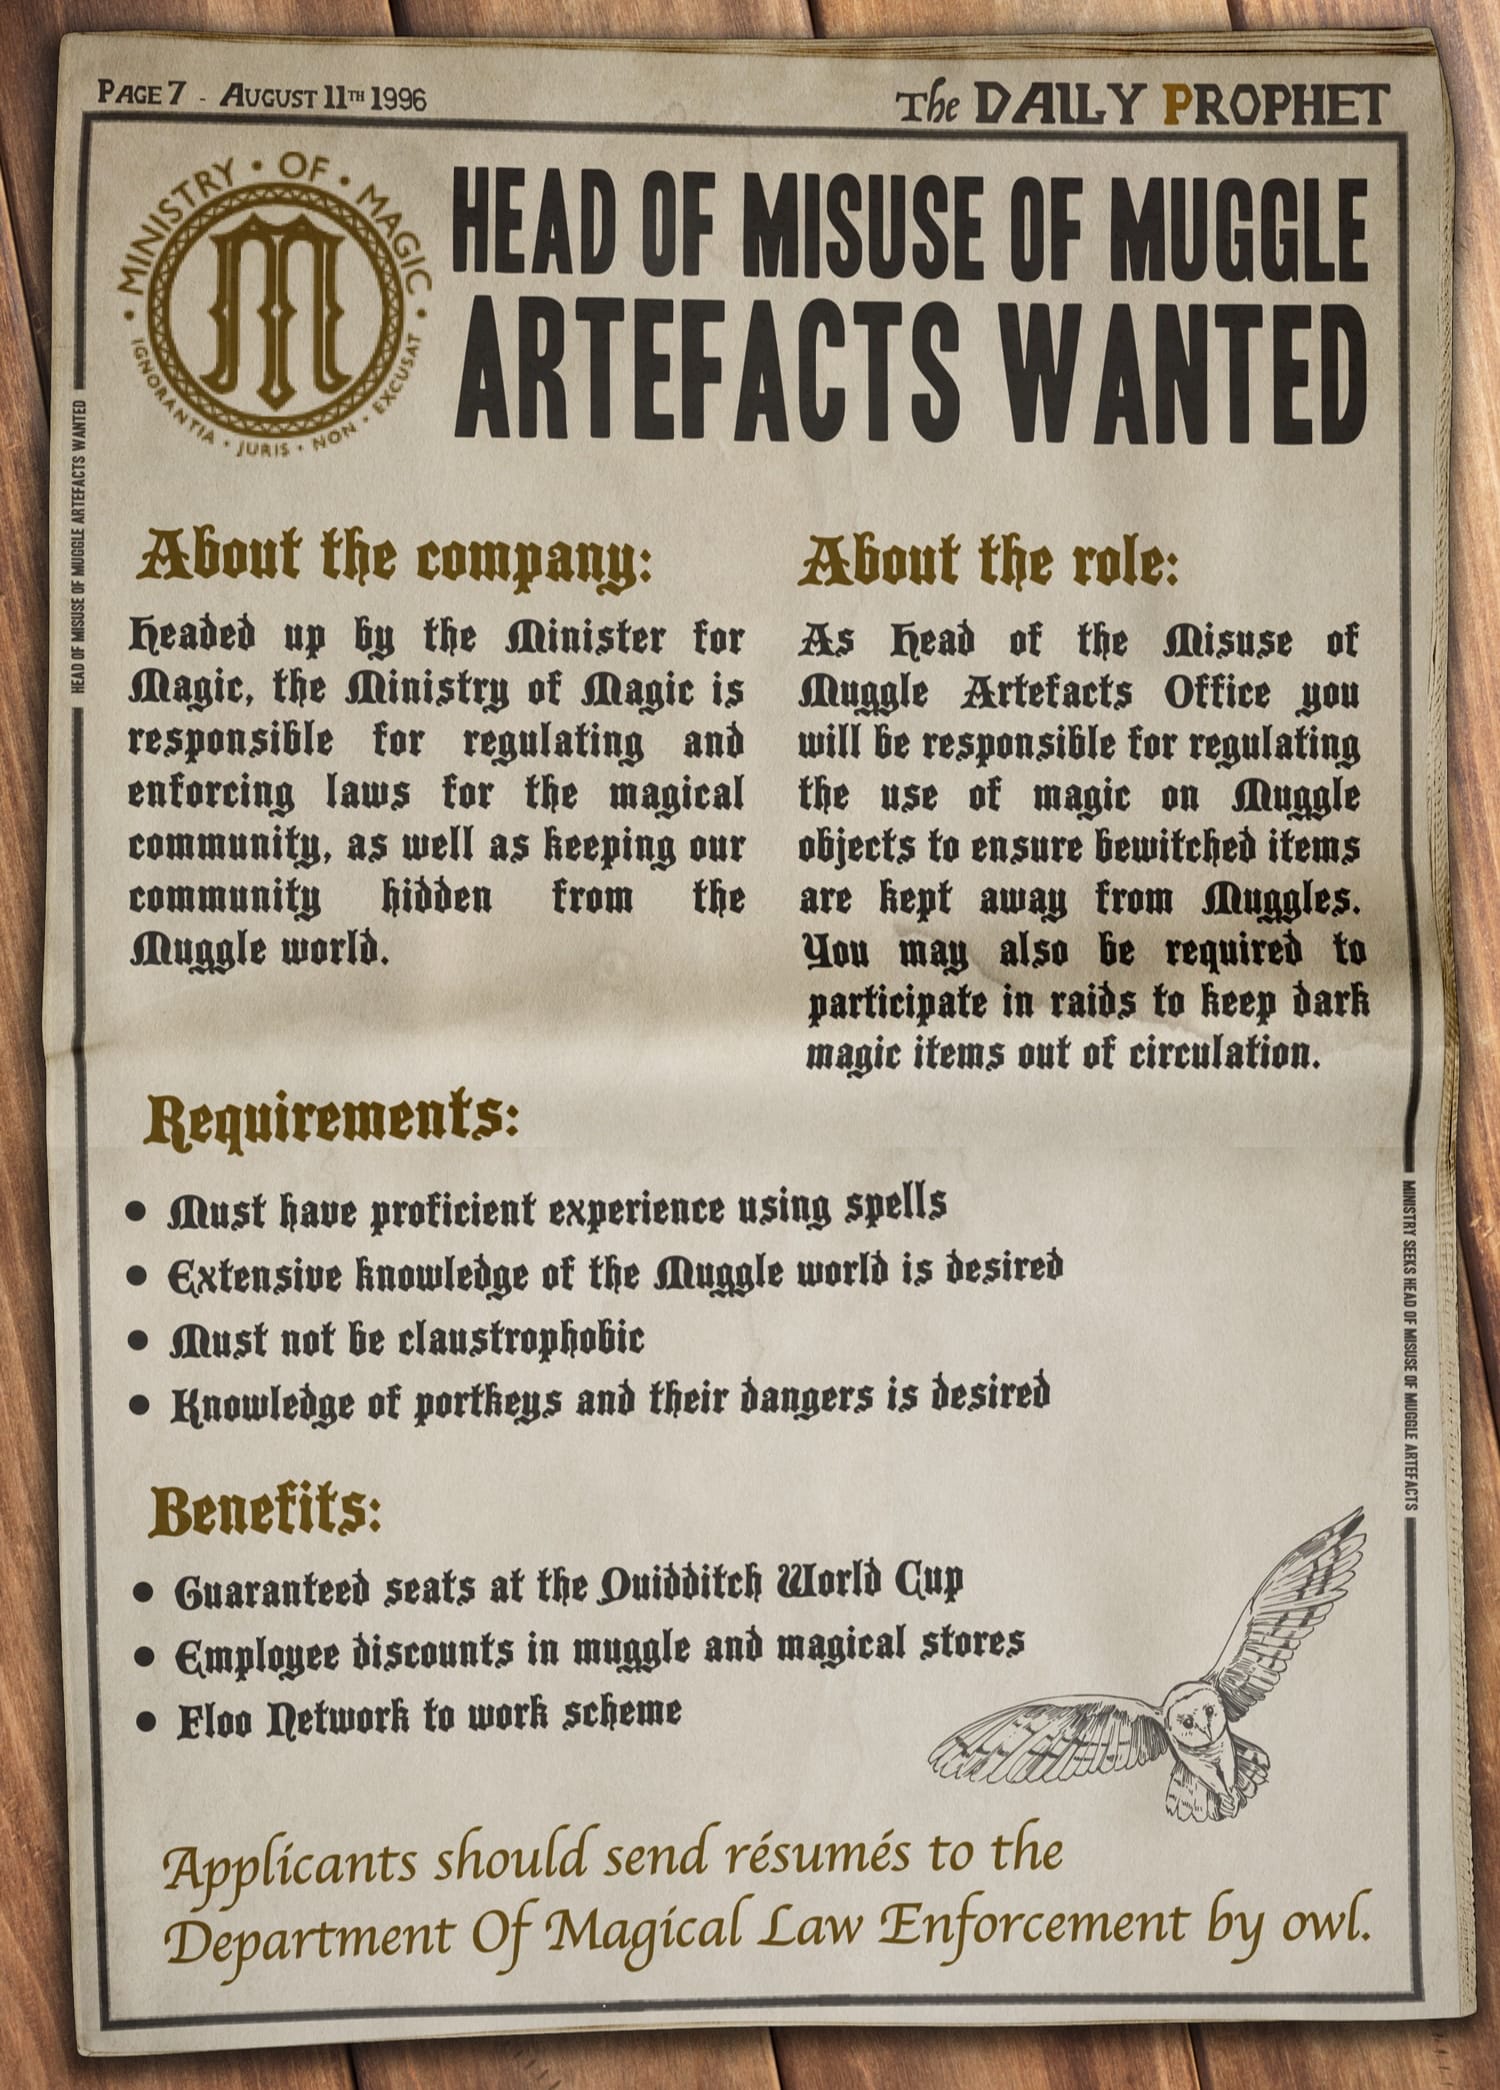 Fictional Harry Potter recruitment poster - Ministry of Magic's advertisement for Head of Misuse of Muggle Artefacts in the Daily Prophet